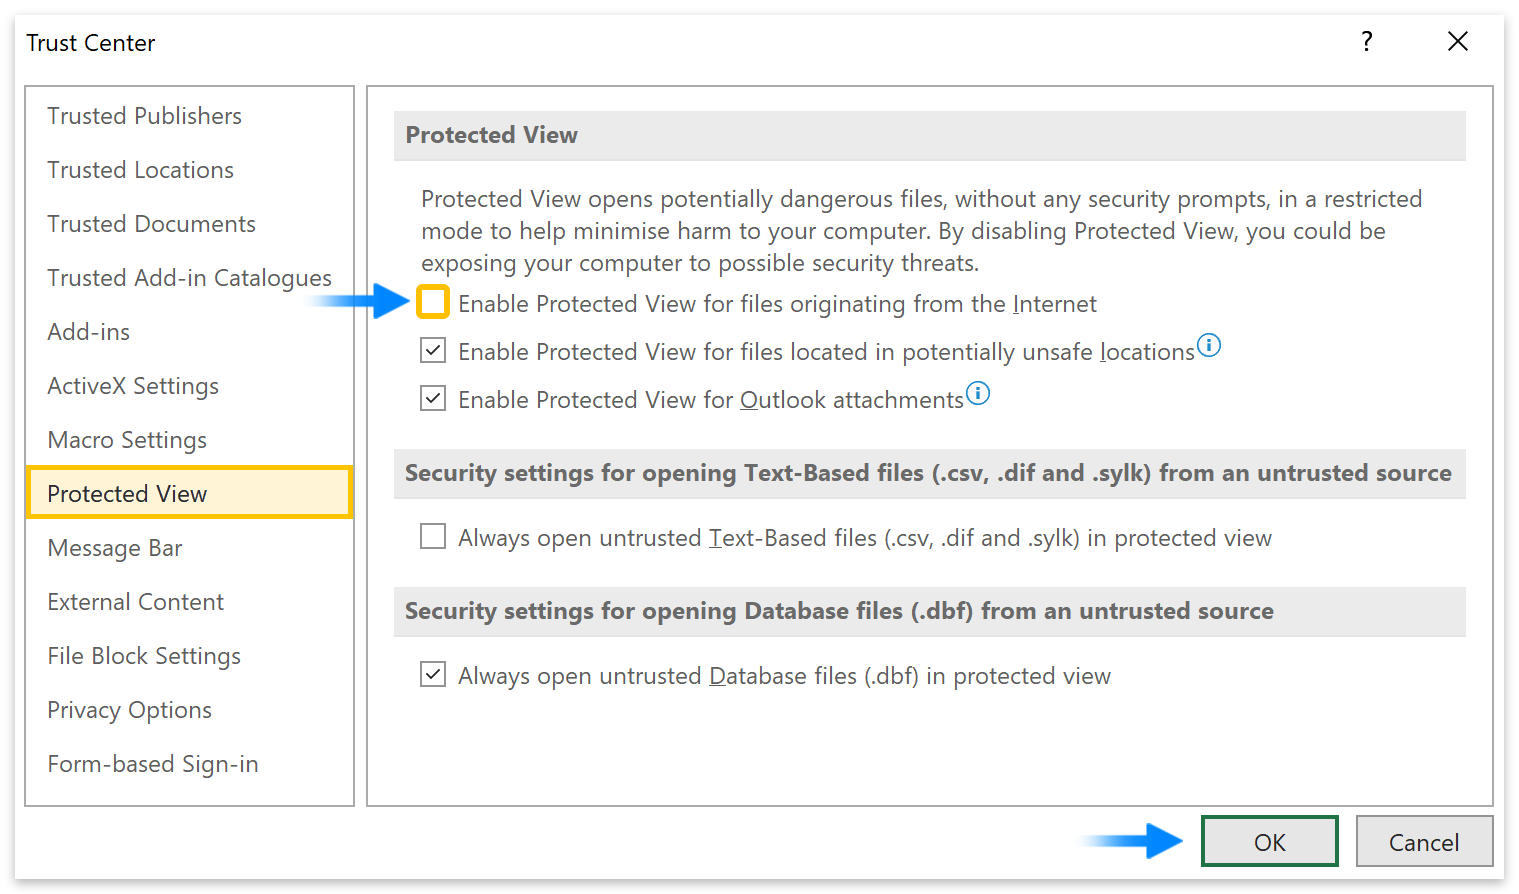 Protected View > Enable Protected View for files originating from the internet > OK.